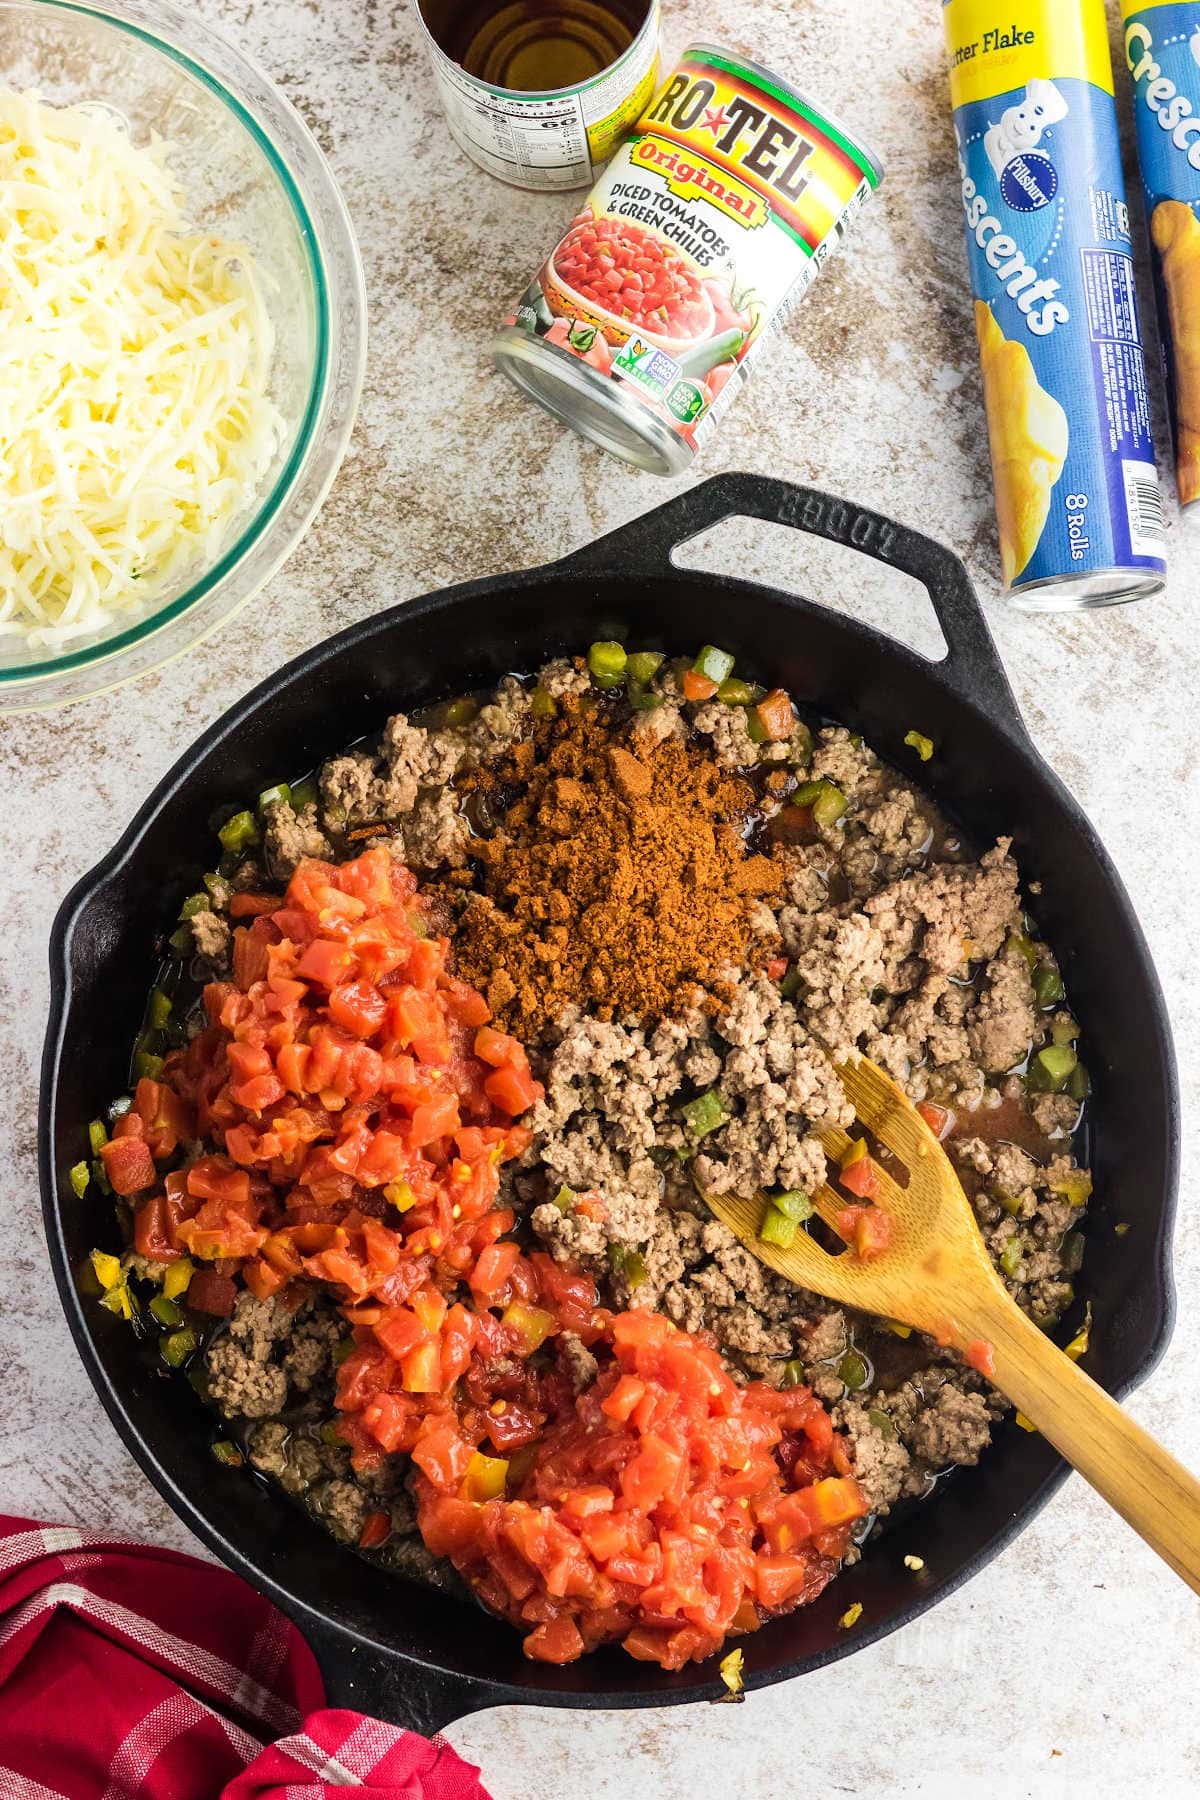 Overhead view of a cast iron skillet with cooked ground beef, taco seasoning and tomatoes in it.